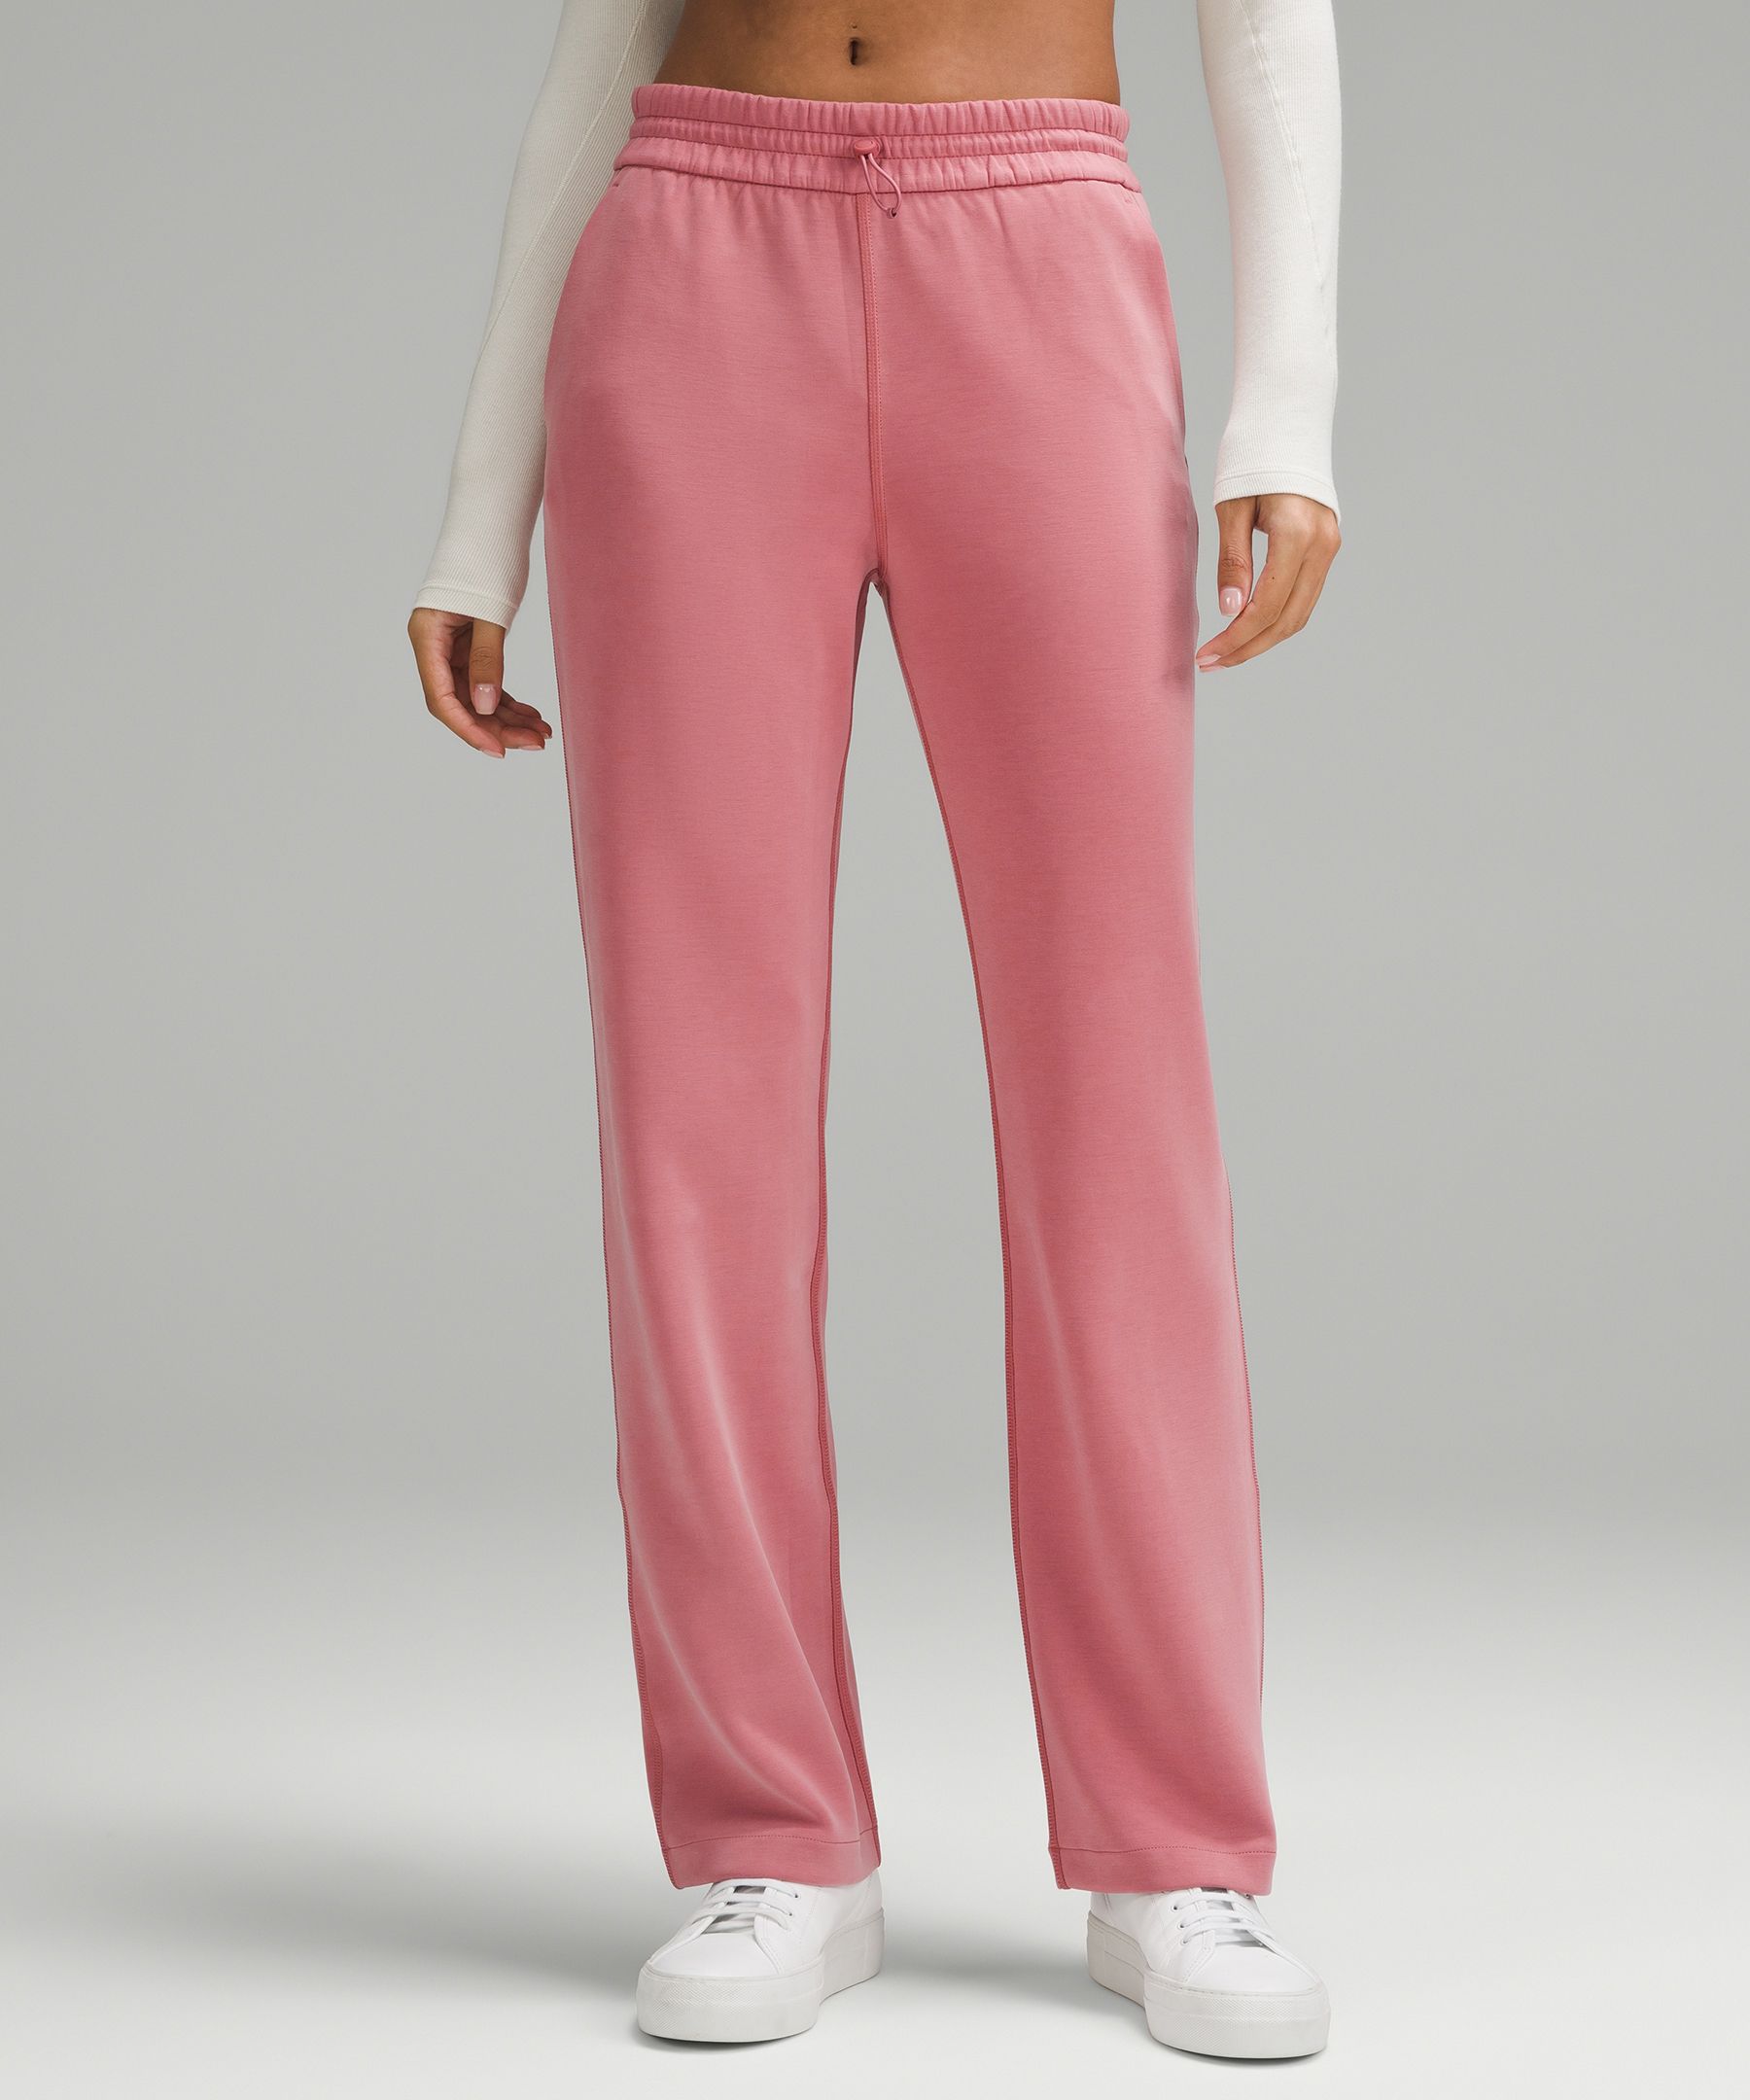 Soft Texture High Rise Align Softstreme Womens Joggers: Weighty Drape Pants  With Straight Leg, Perfect For Sweating And Lounging From  Hellowelcomelulus, $4.35